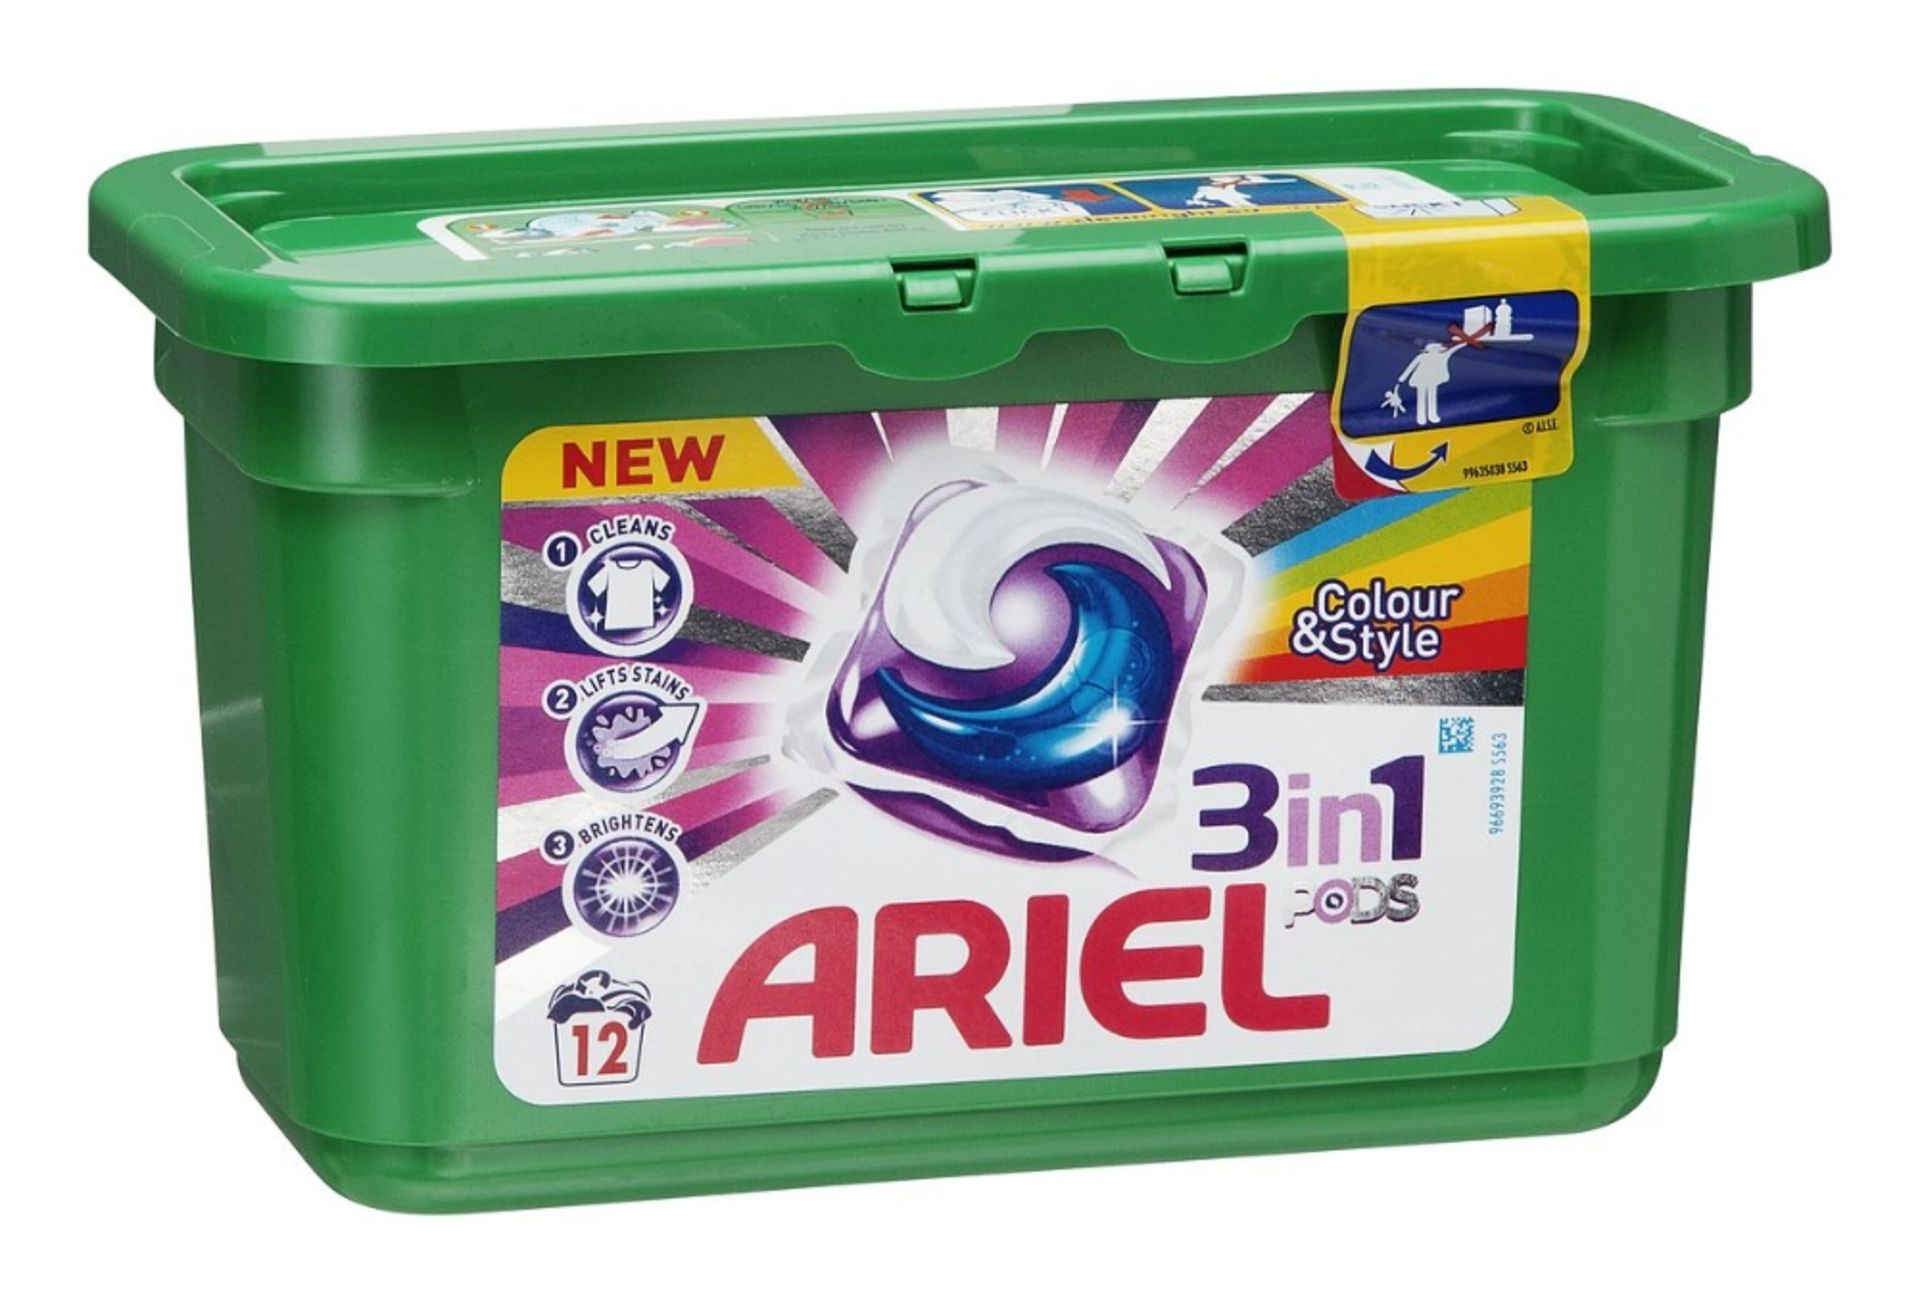 V *TRADE QTY* Brand New Ariel 3 In 1 Pods Colour 12 Pack X 12 YOUR BID PRICE TO BE MULTIPLIED BY